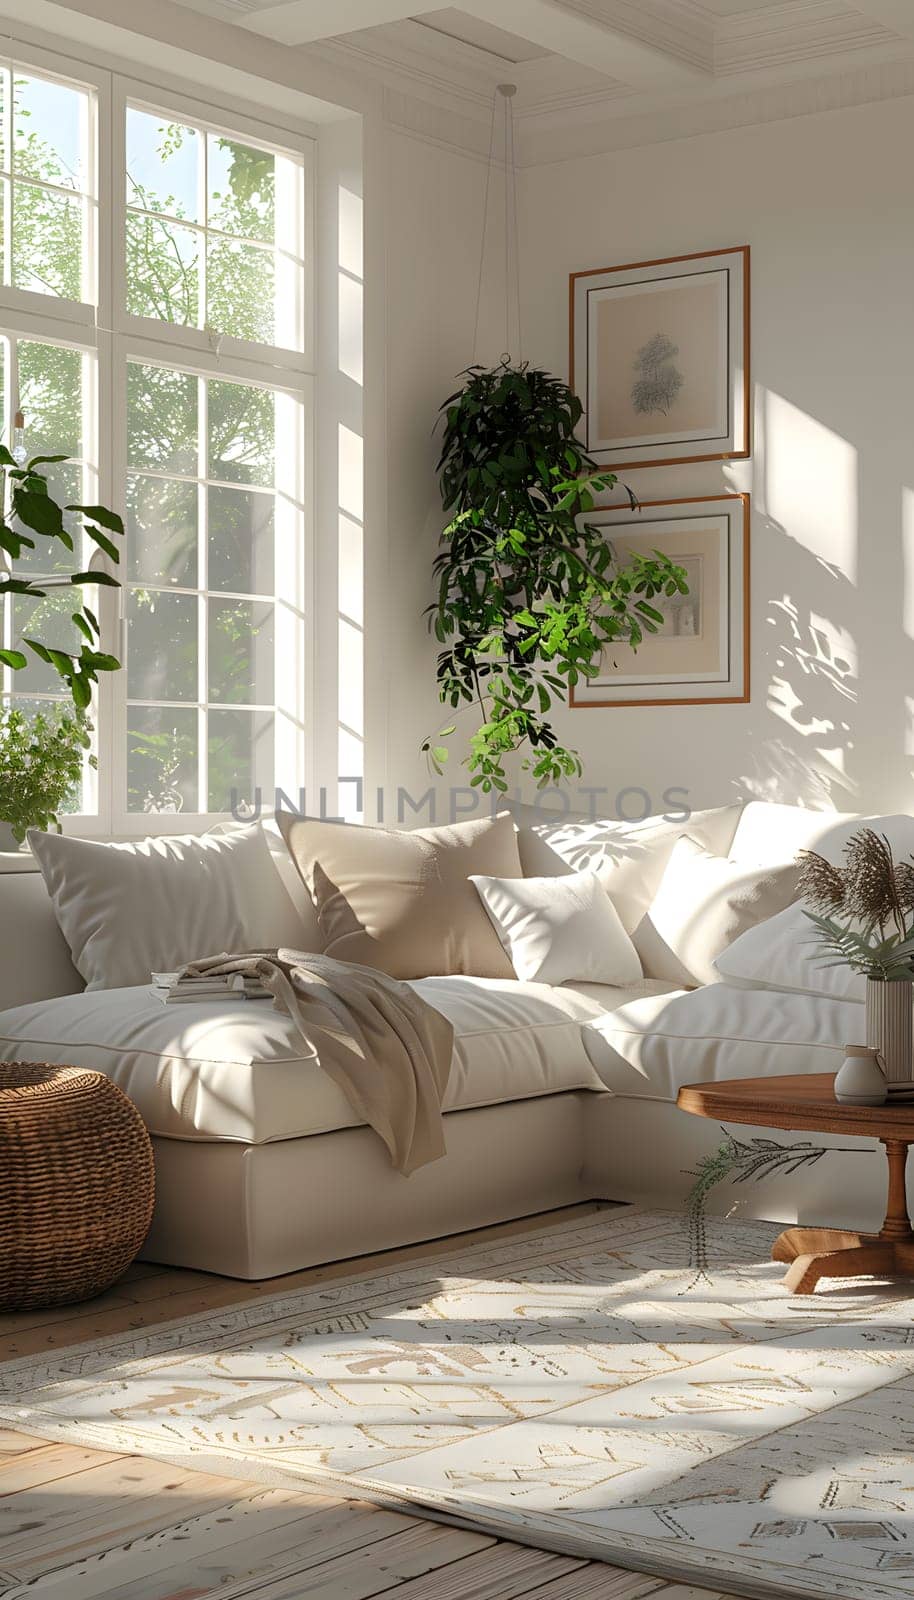 A living room with hardwood flooring, a comfortable couch, a coffee table, and plenty of windows providing natural light and views of green plants outside